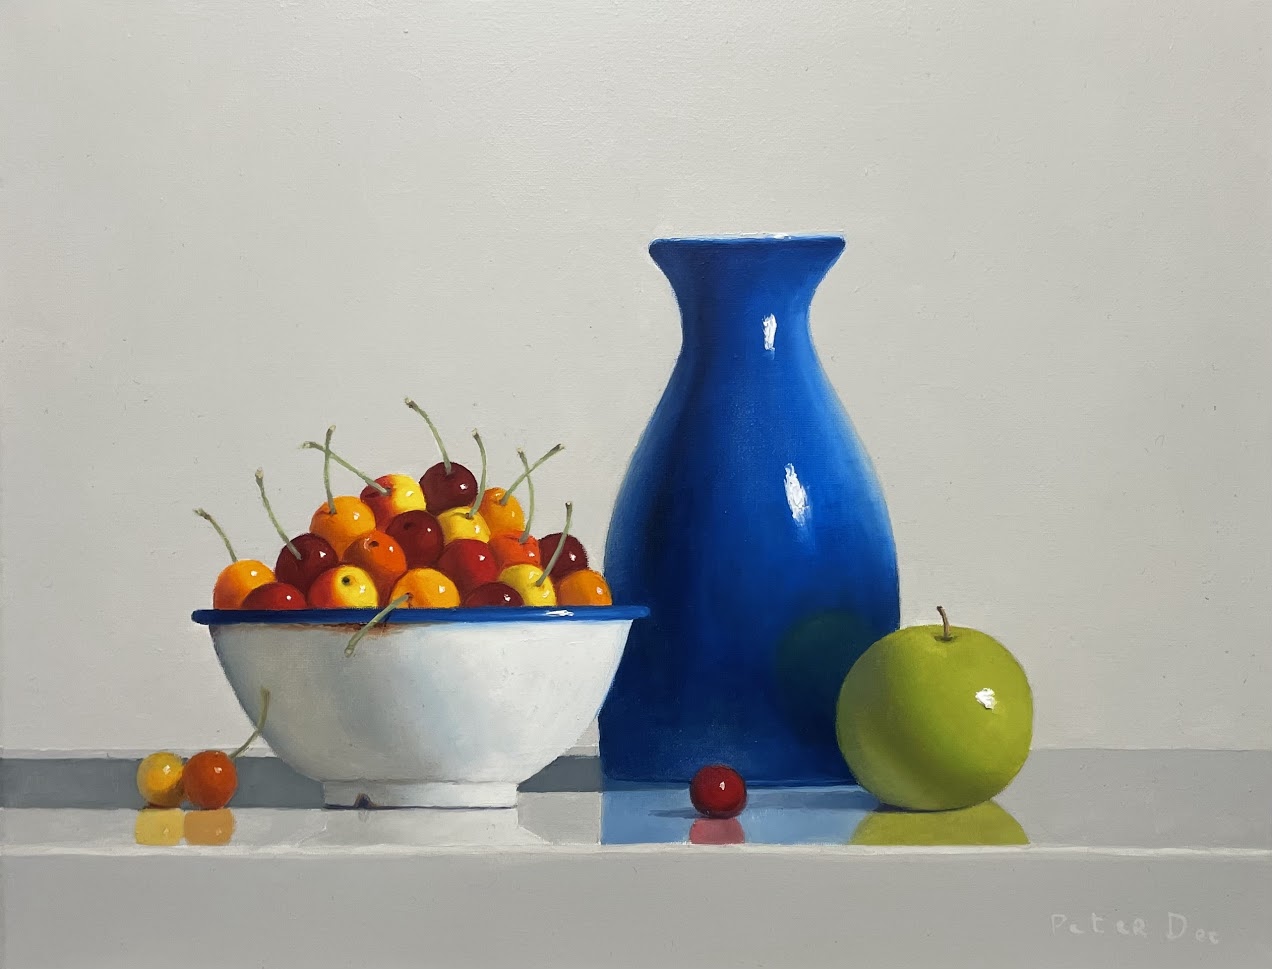  Navy Vase with Cherries and Apple  by Peter Dee